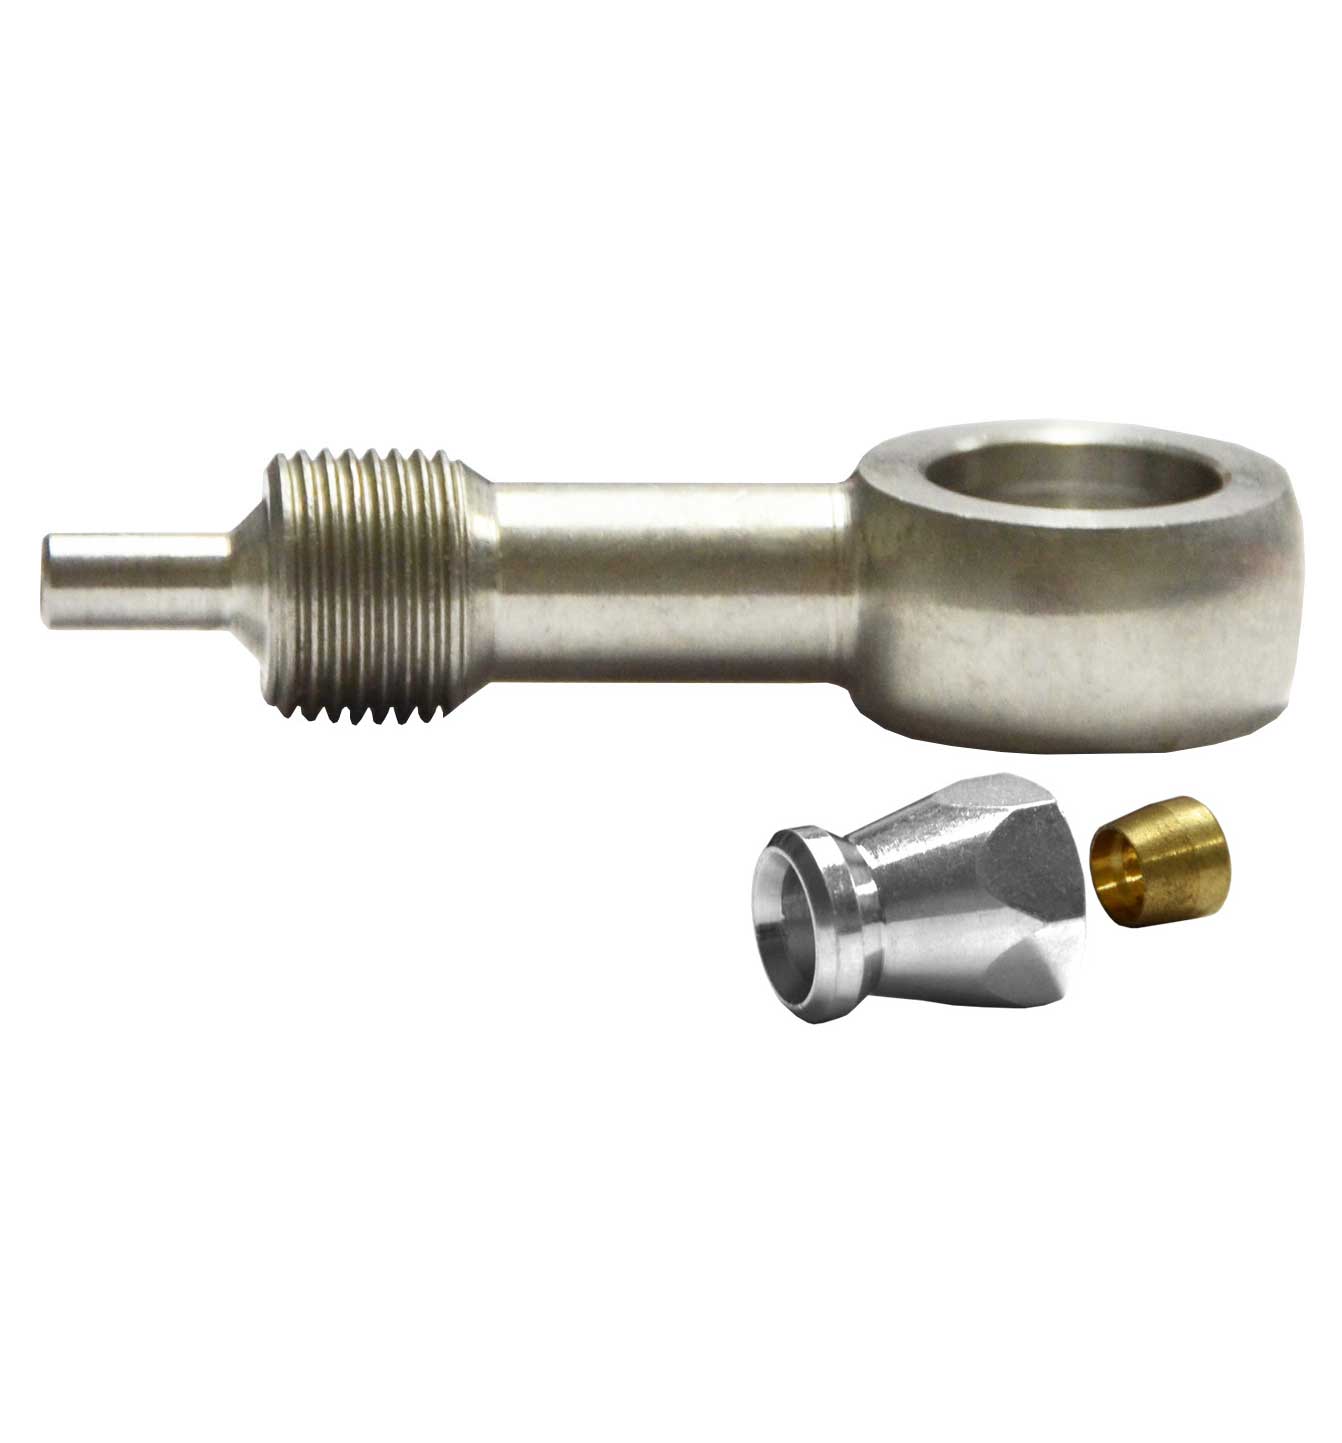 7/16" Banjo Fitting for AN-3 (3mm) - Straight Zinc Plated